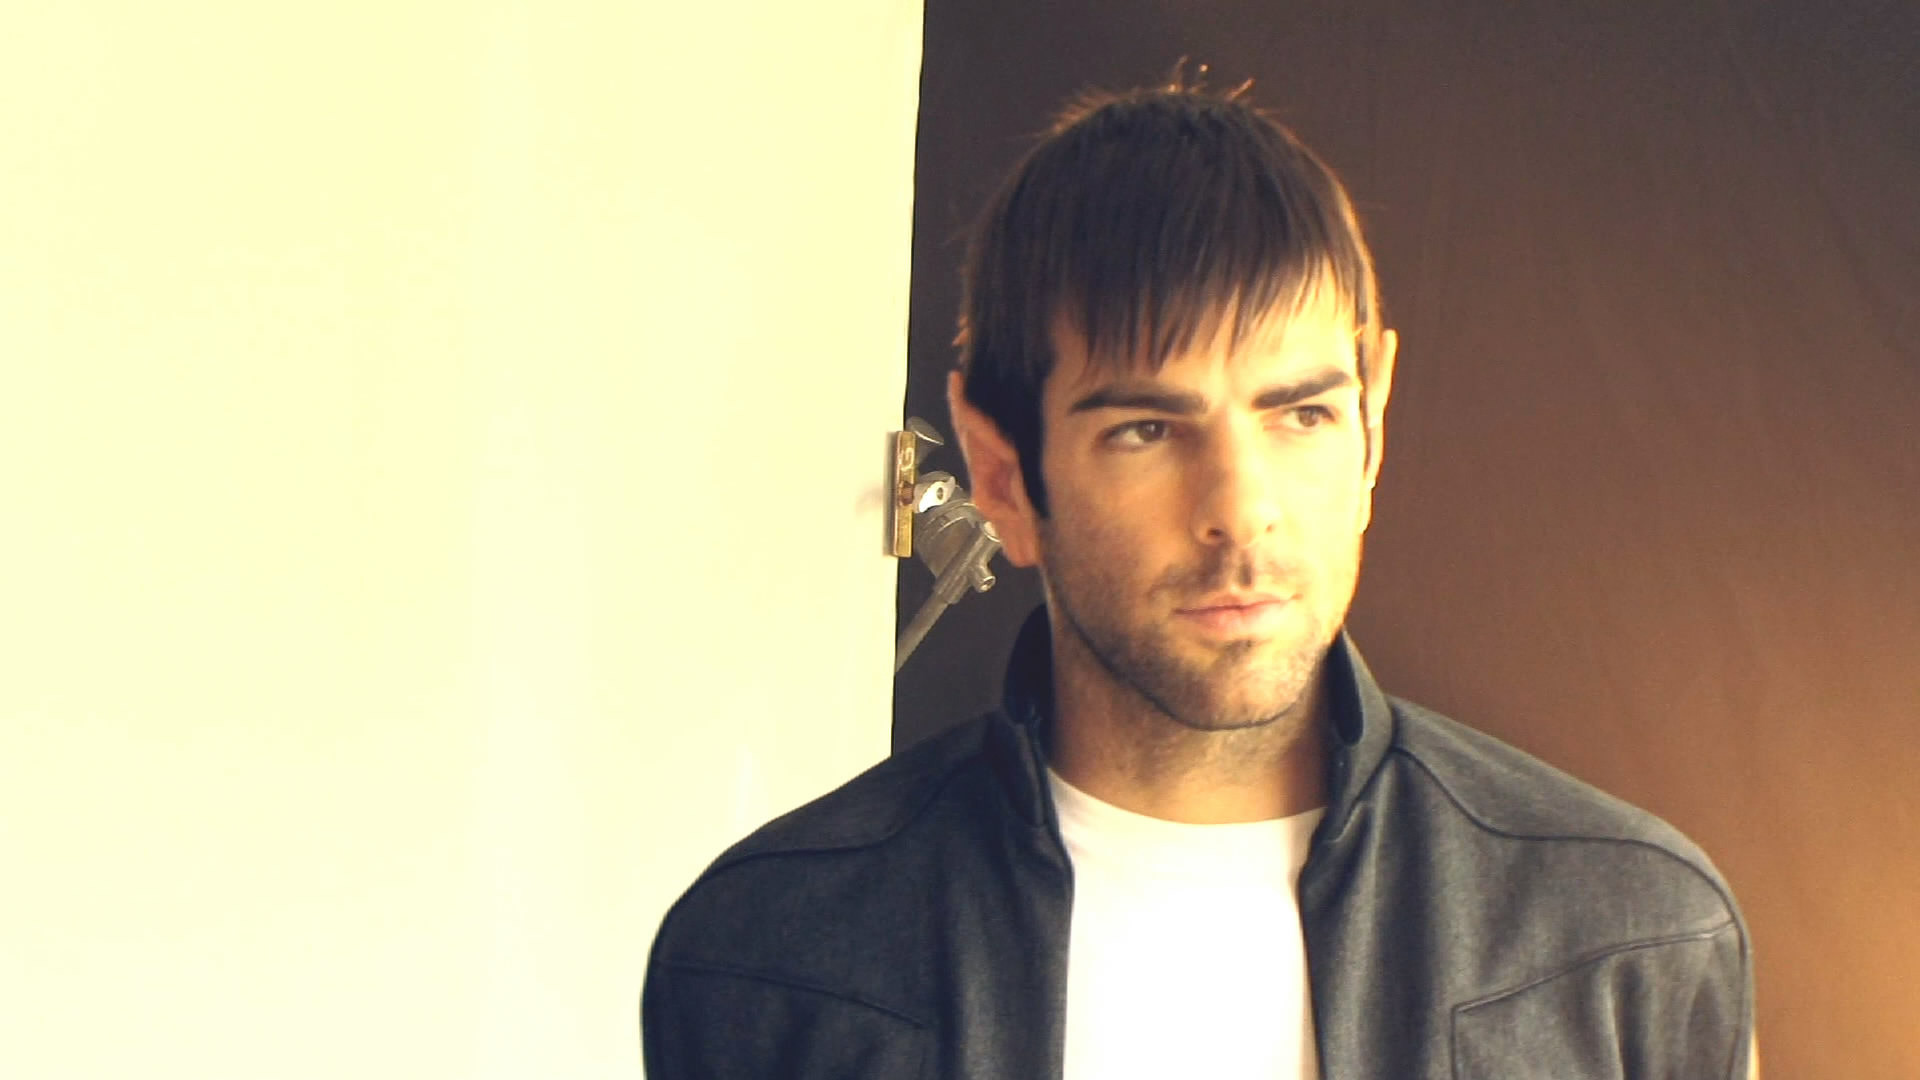 1920x1080 Photo of Behind the scenes: Zachary Quinto as Spock.